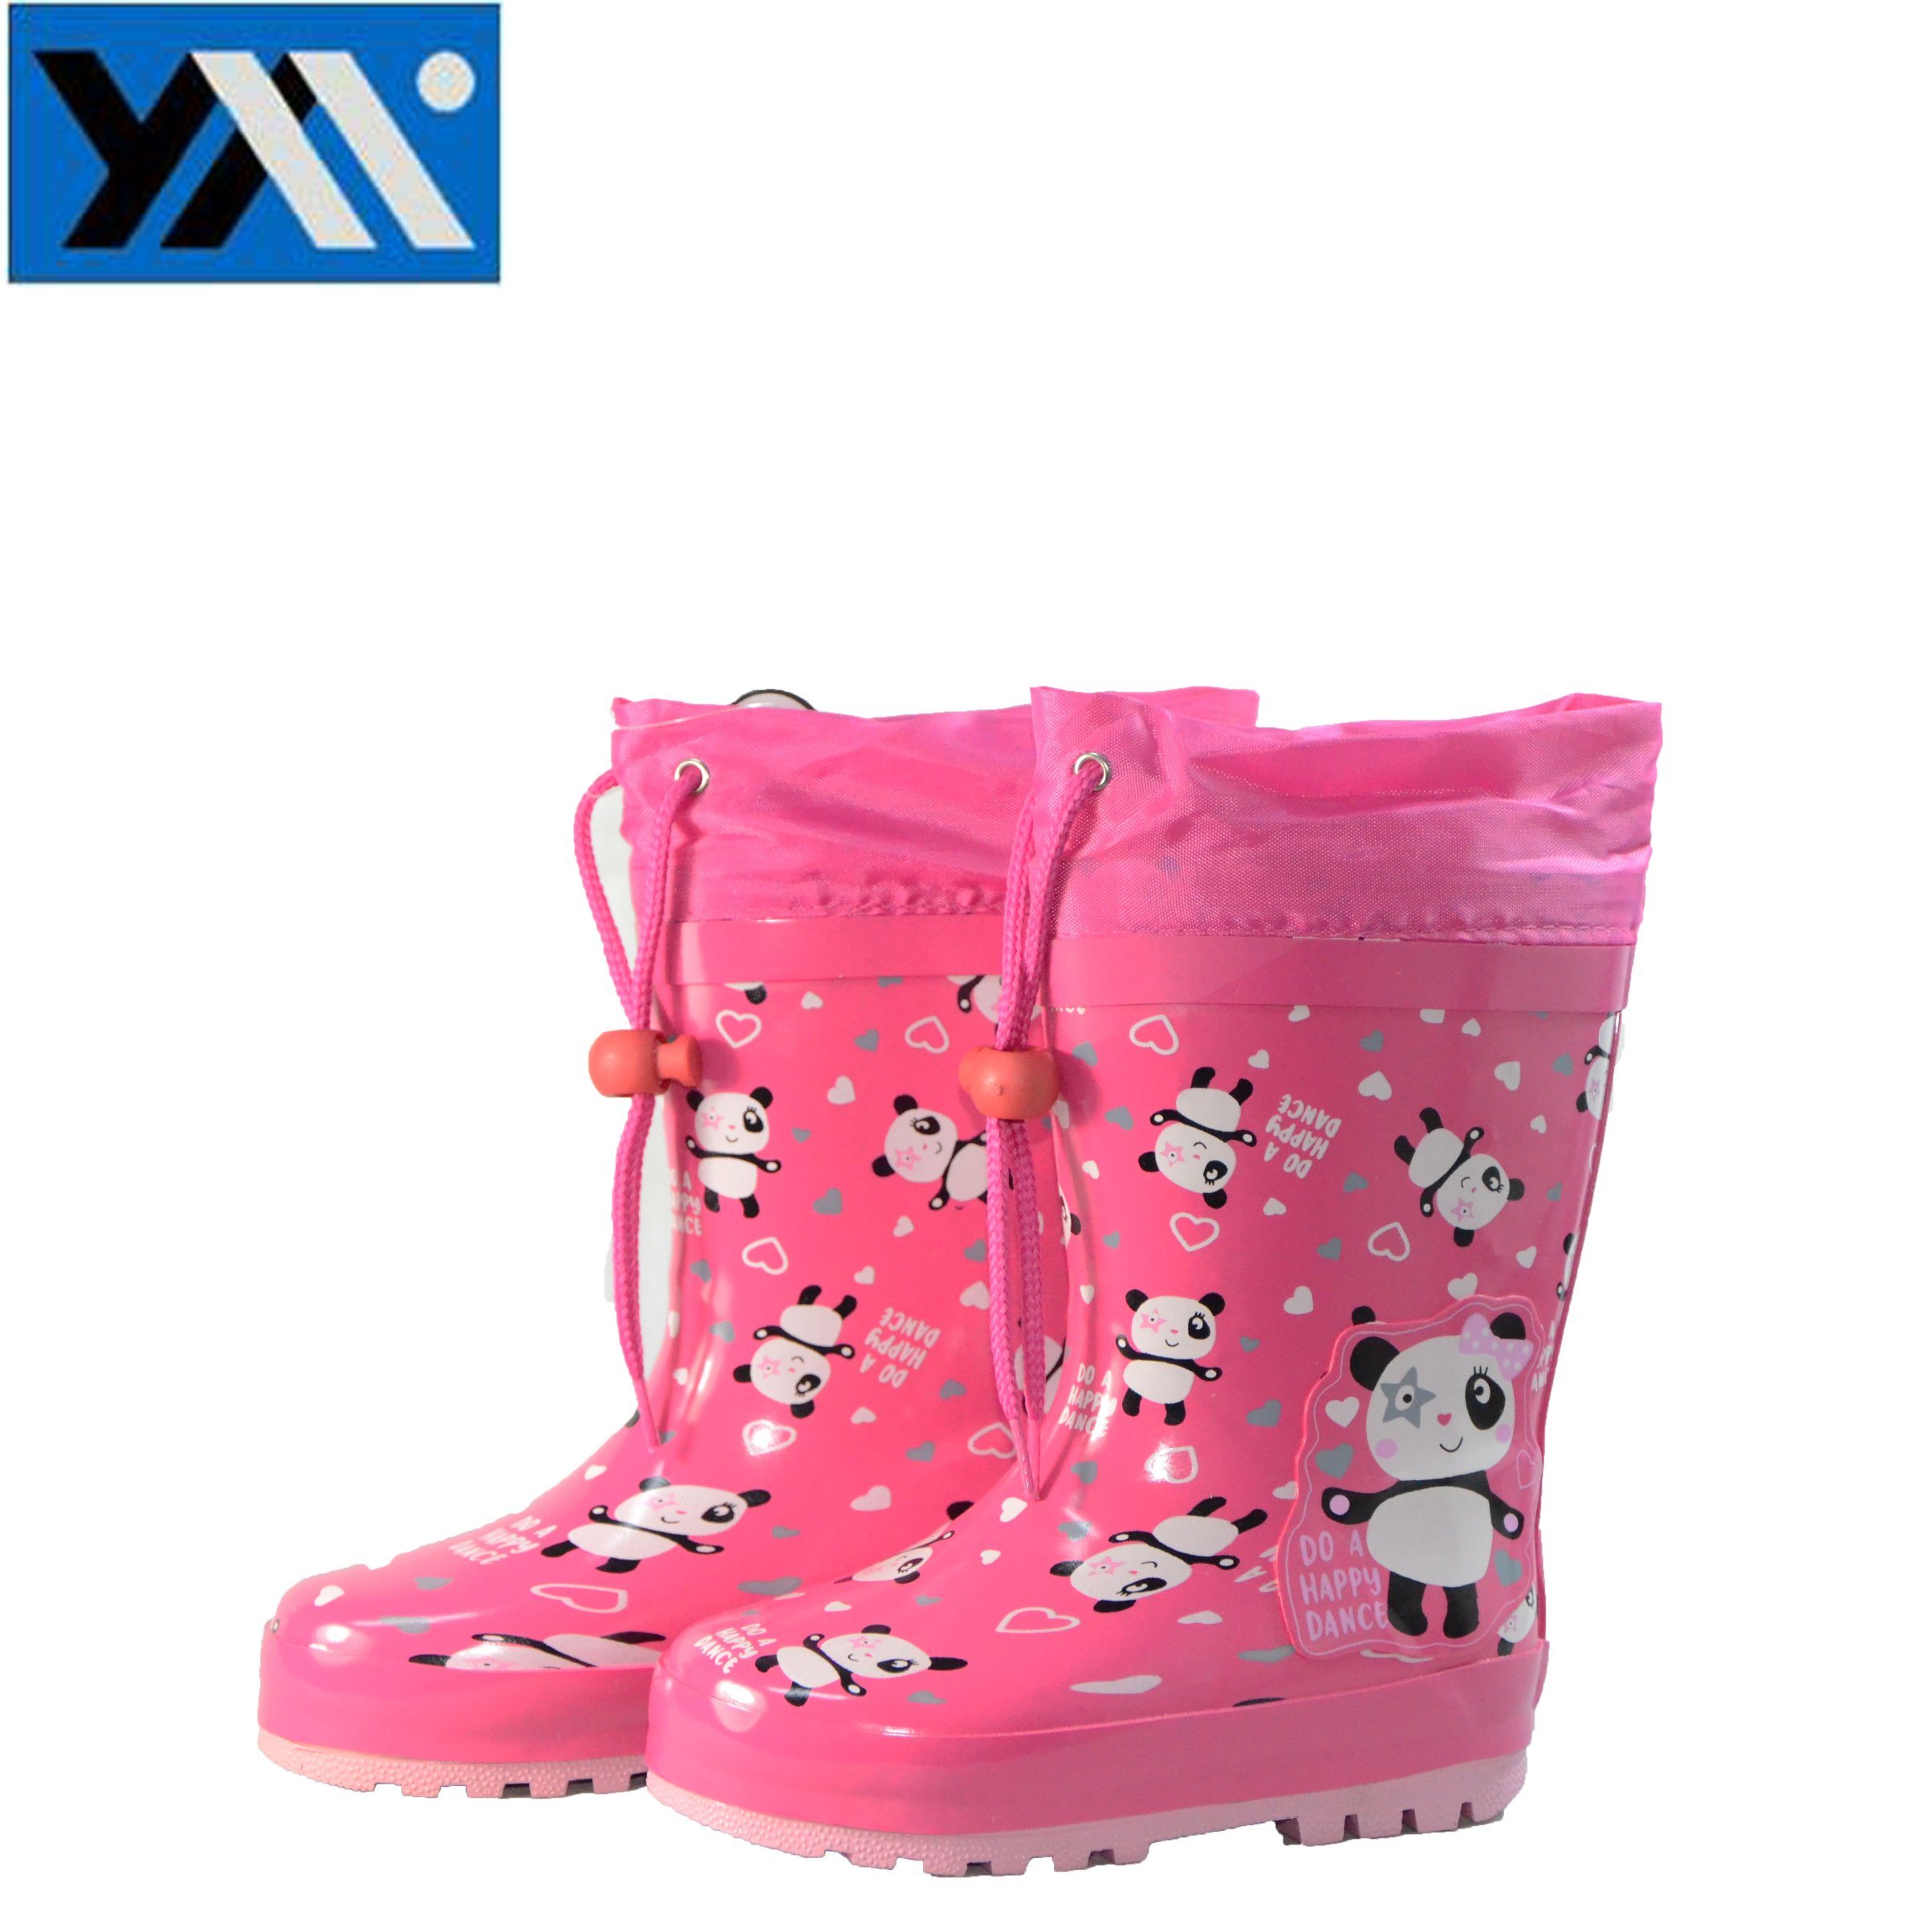 2018 Sunny Kids Waterproof Wellington Rainboots Children Wellies High Quality Natural Rubber Shoes with Textile Collar Footwear